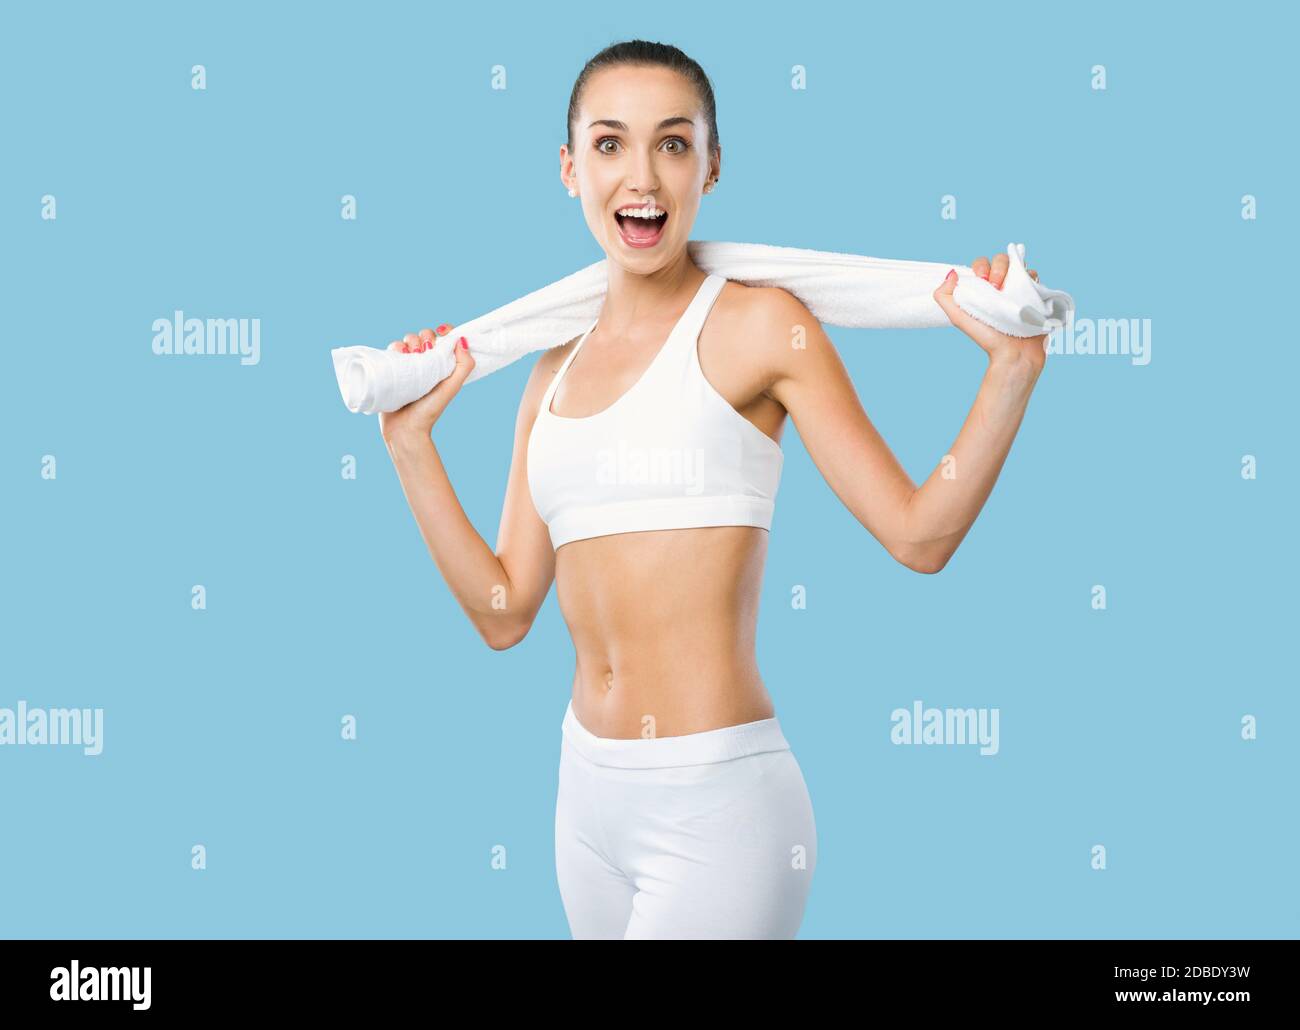 Happy fit woman holding a towel and posing after working out, fitness and exercising concept Stock Photo